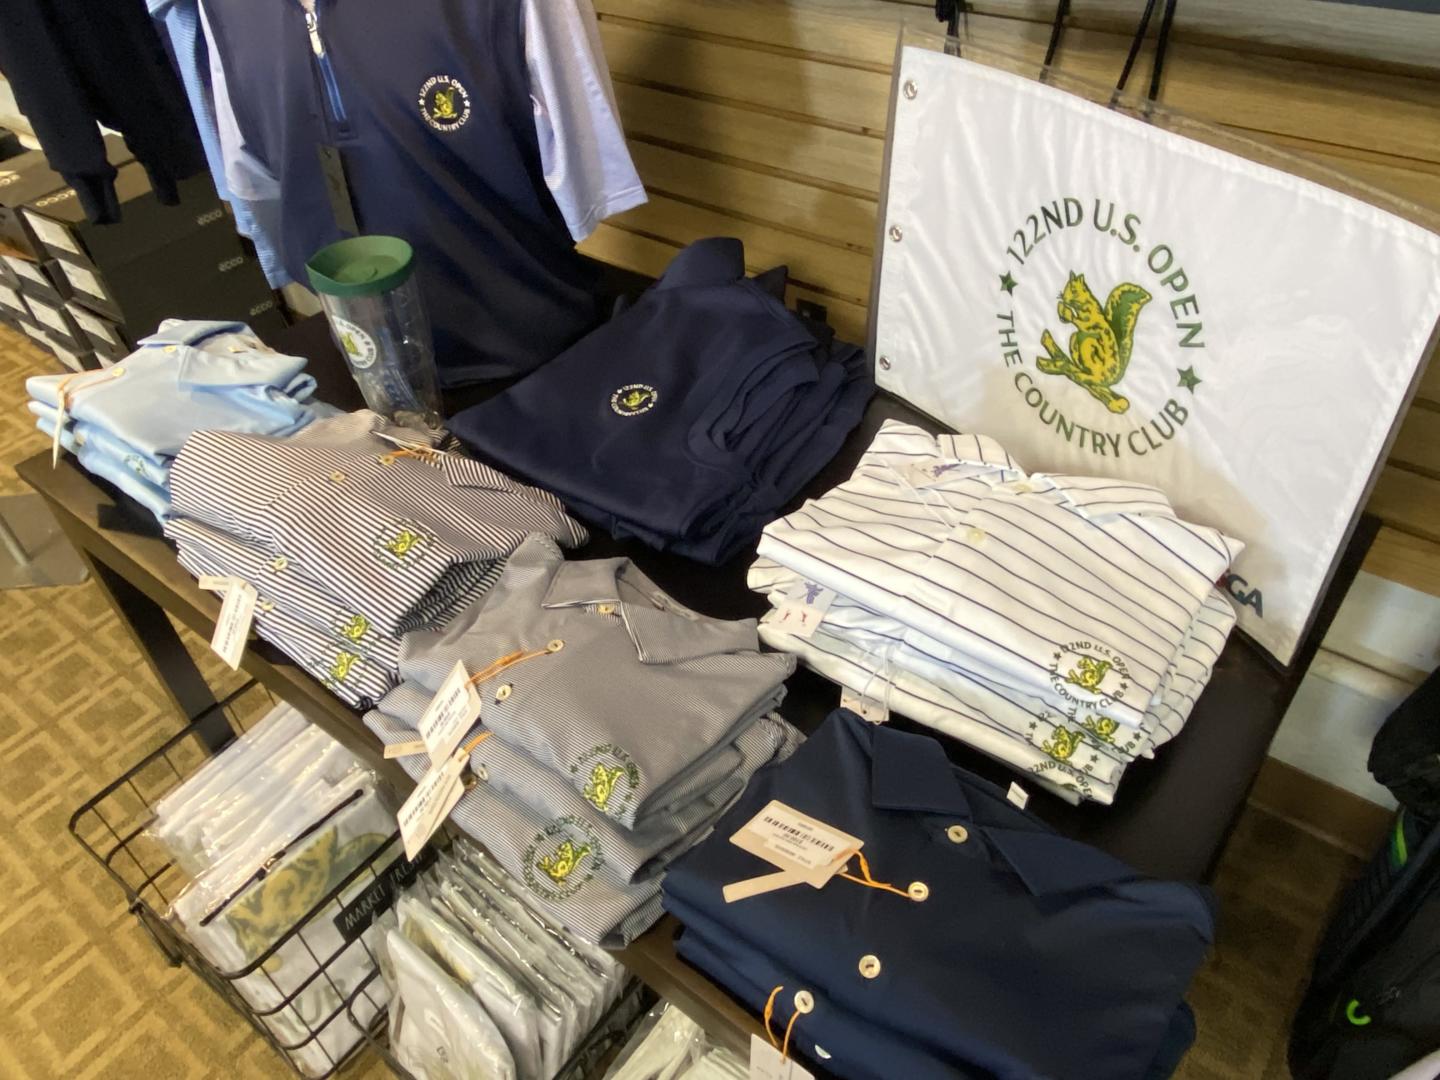 U.S. Open-branded apparel is available in the pro shop of Brookline Golf Course, with proceeds supporting local Brookline non-profits and community groups.